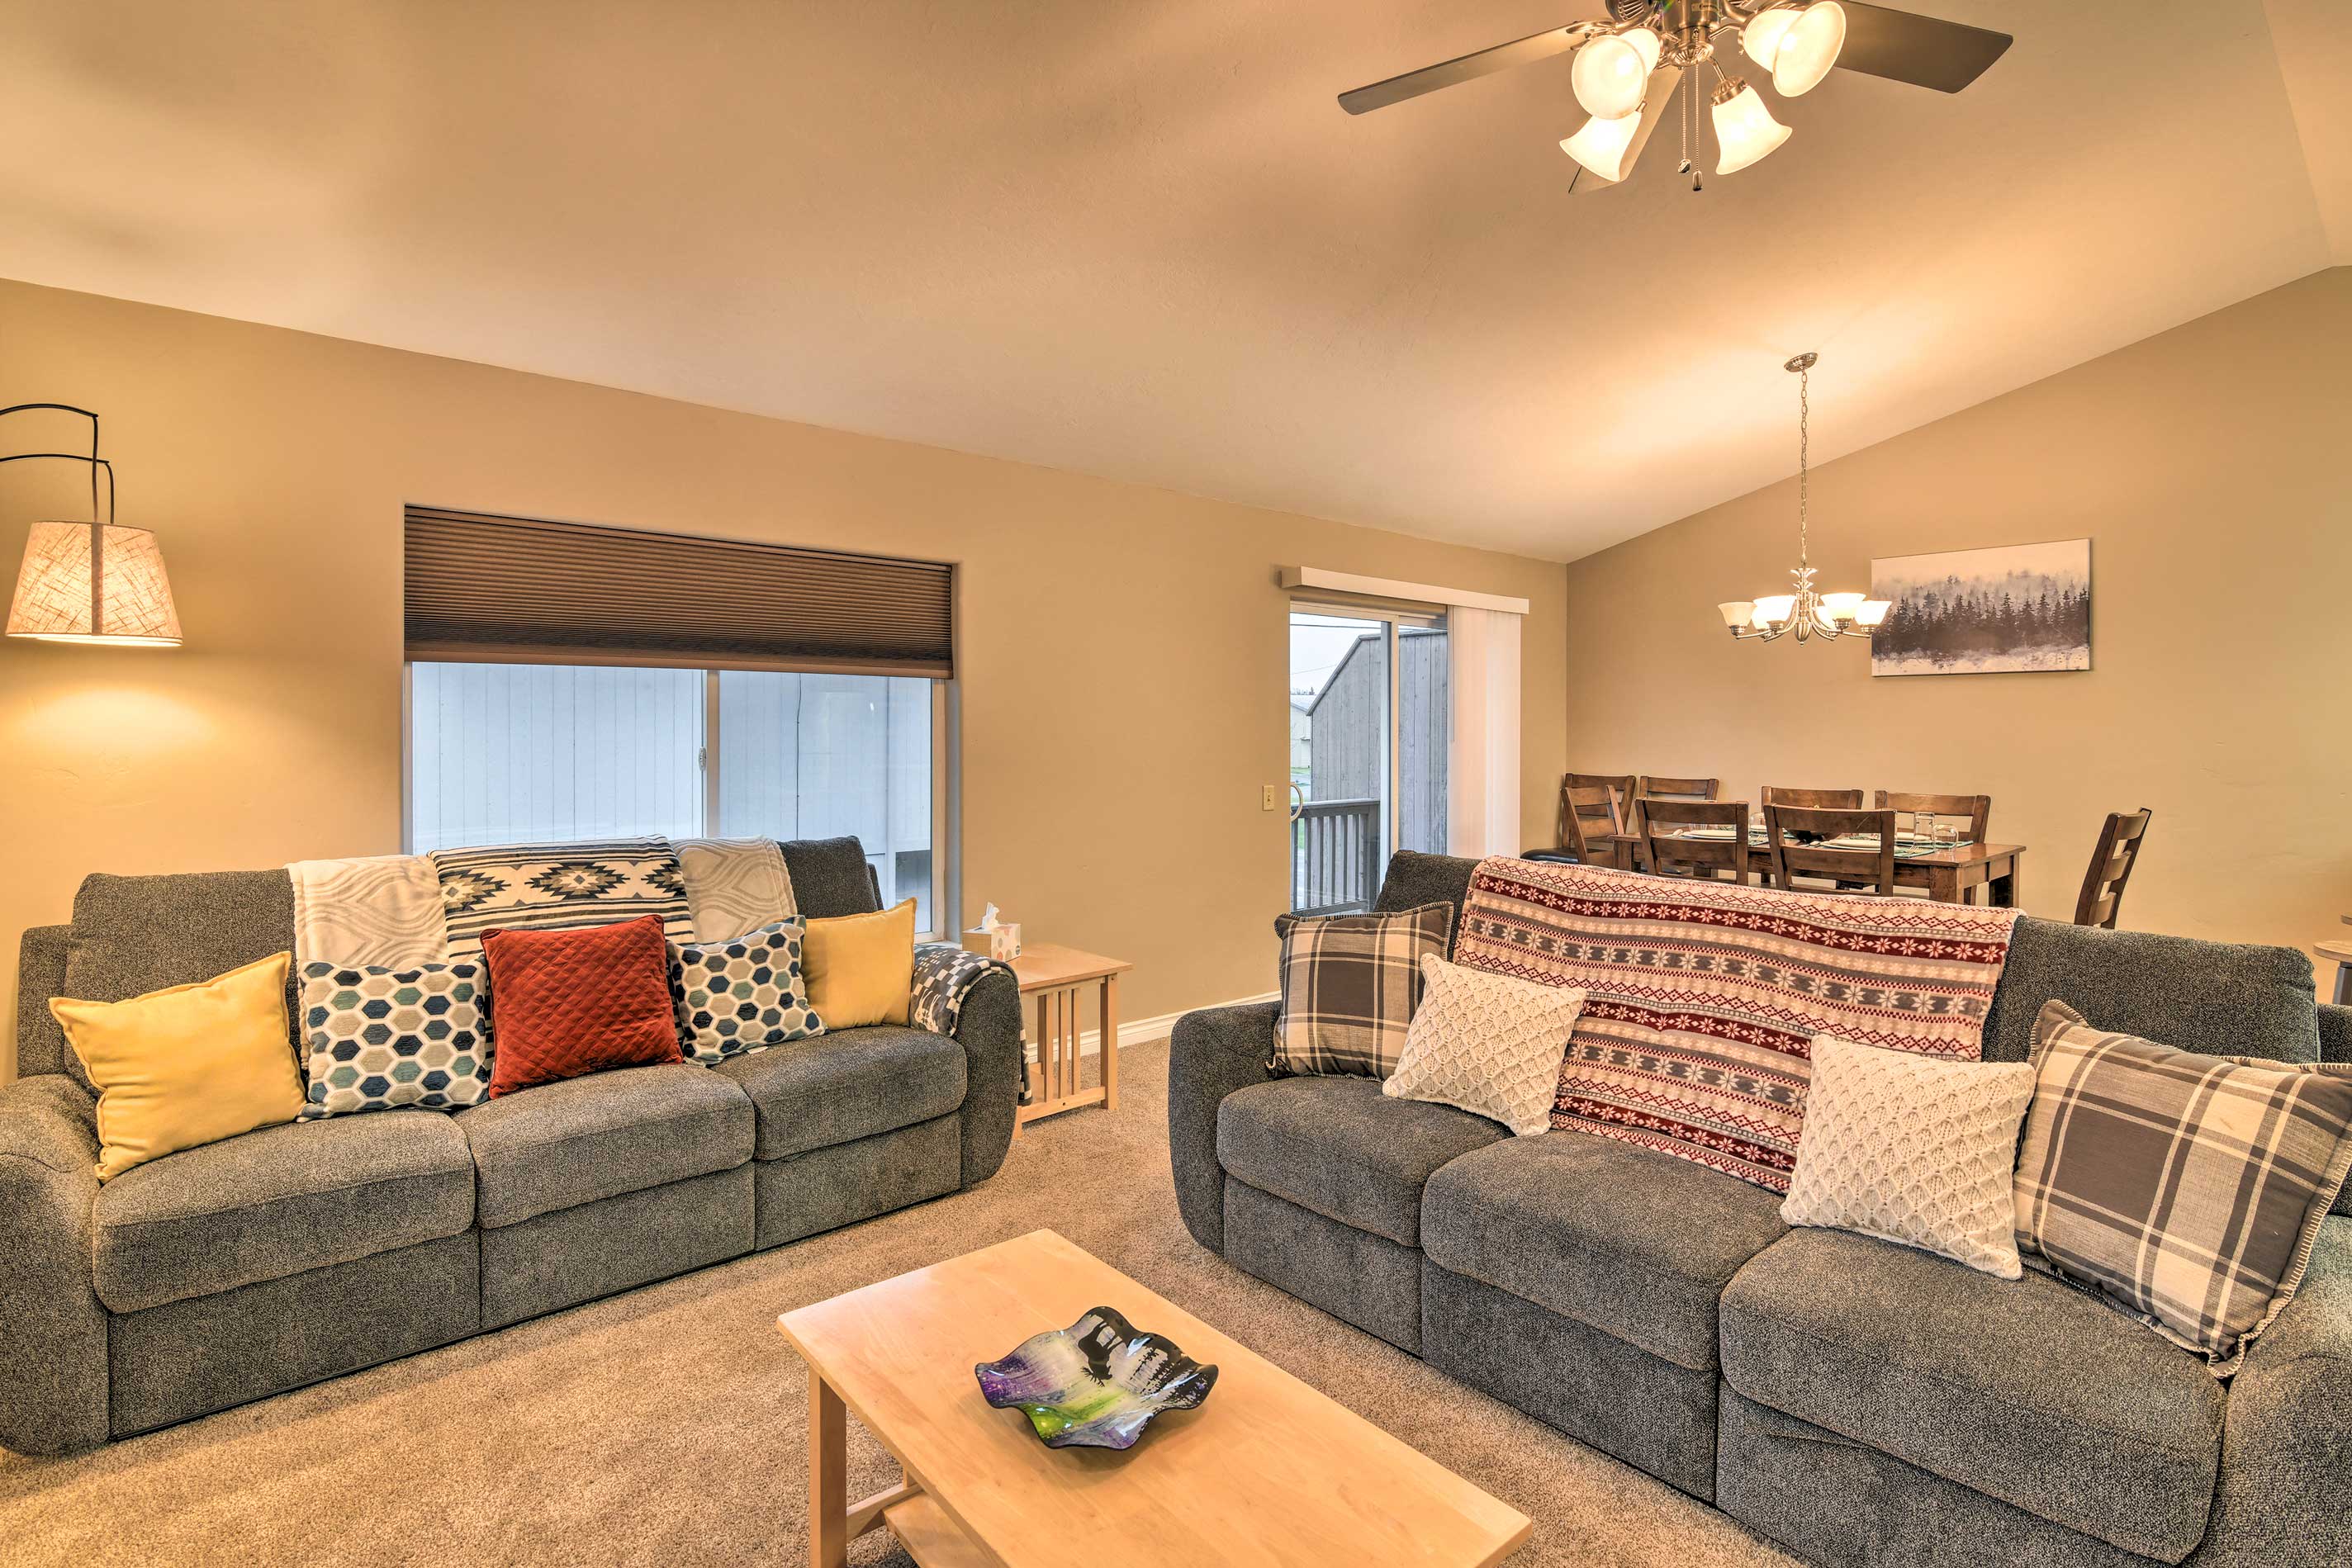 Relax on the comfy couches after a day exploring Anchorage.